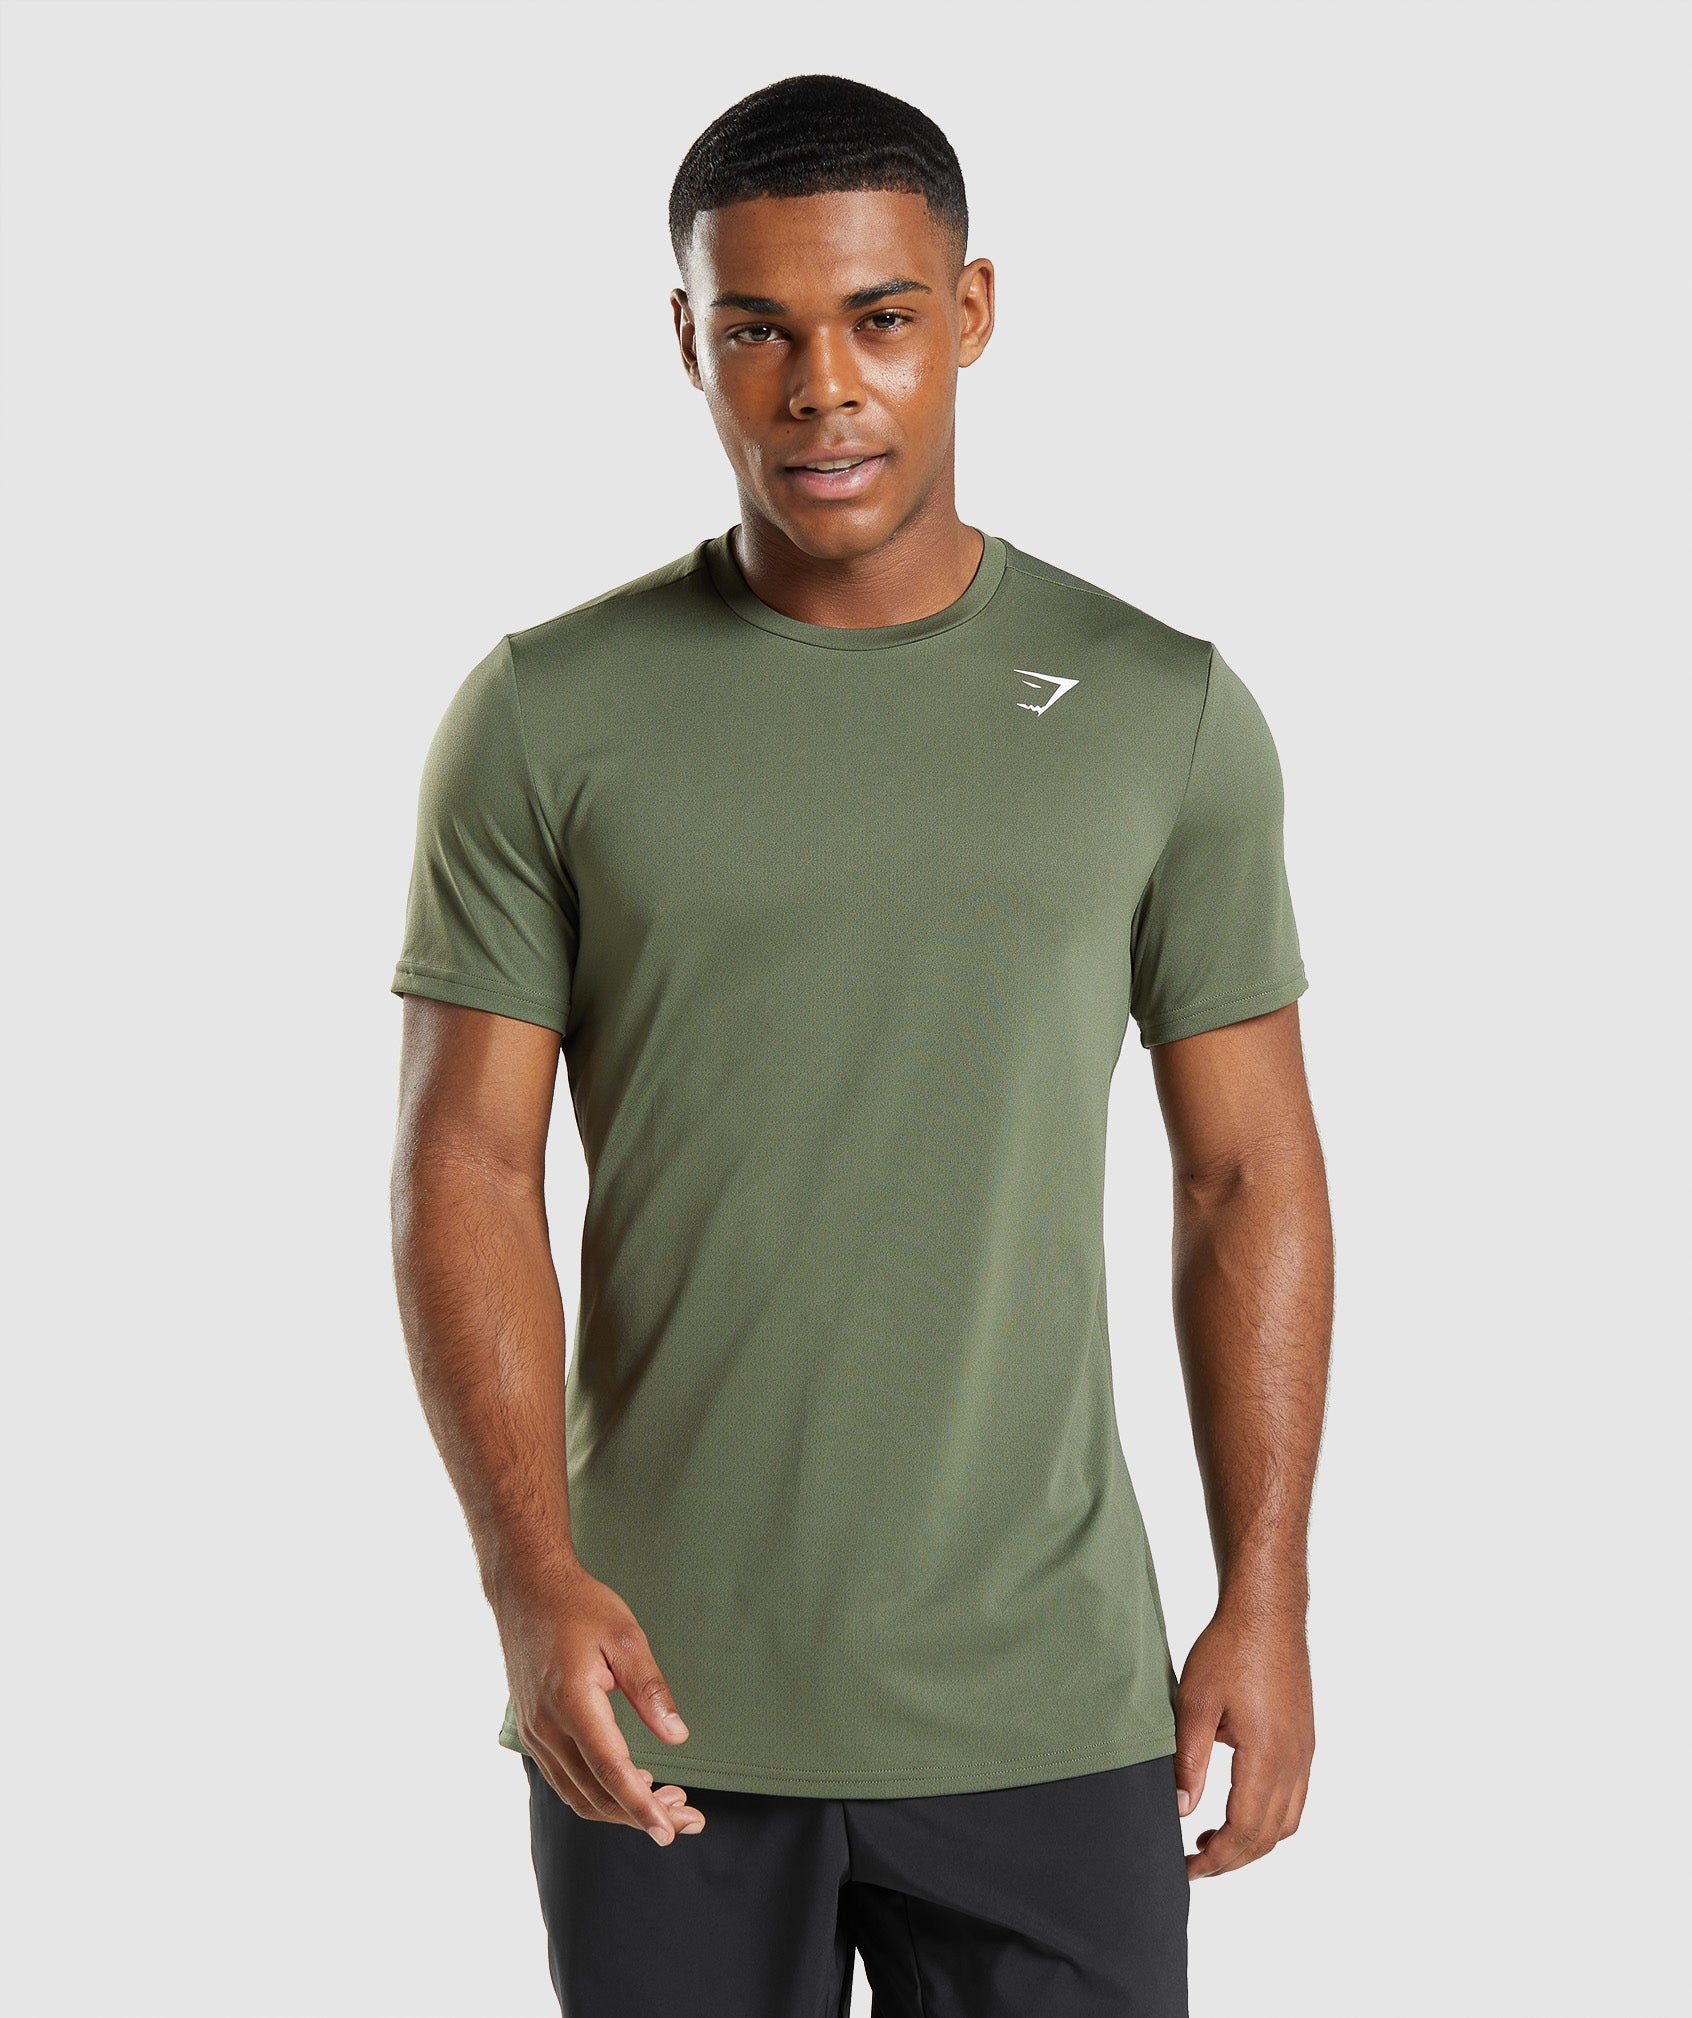 Men's Muscle Fit shirts – Muscle shirts from Gymshark